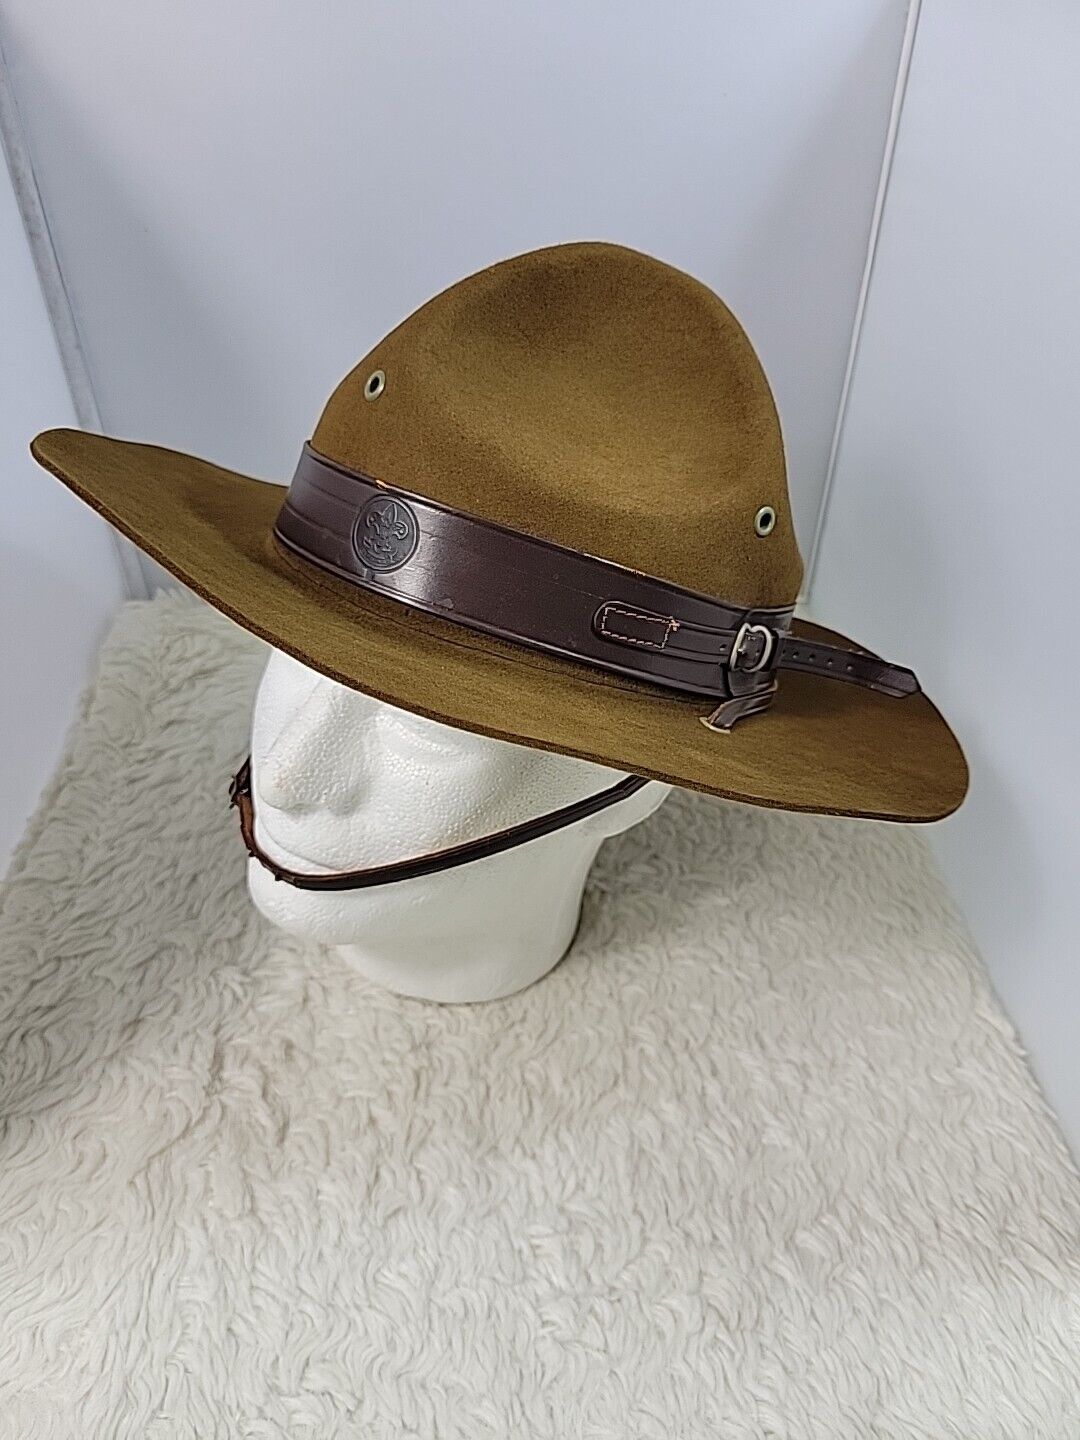 Vintage Stetson Scout Master Hat Perfect Oval Boy Scouts of America 7 1/4 Hiking